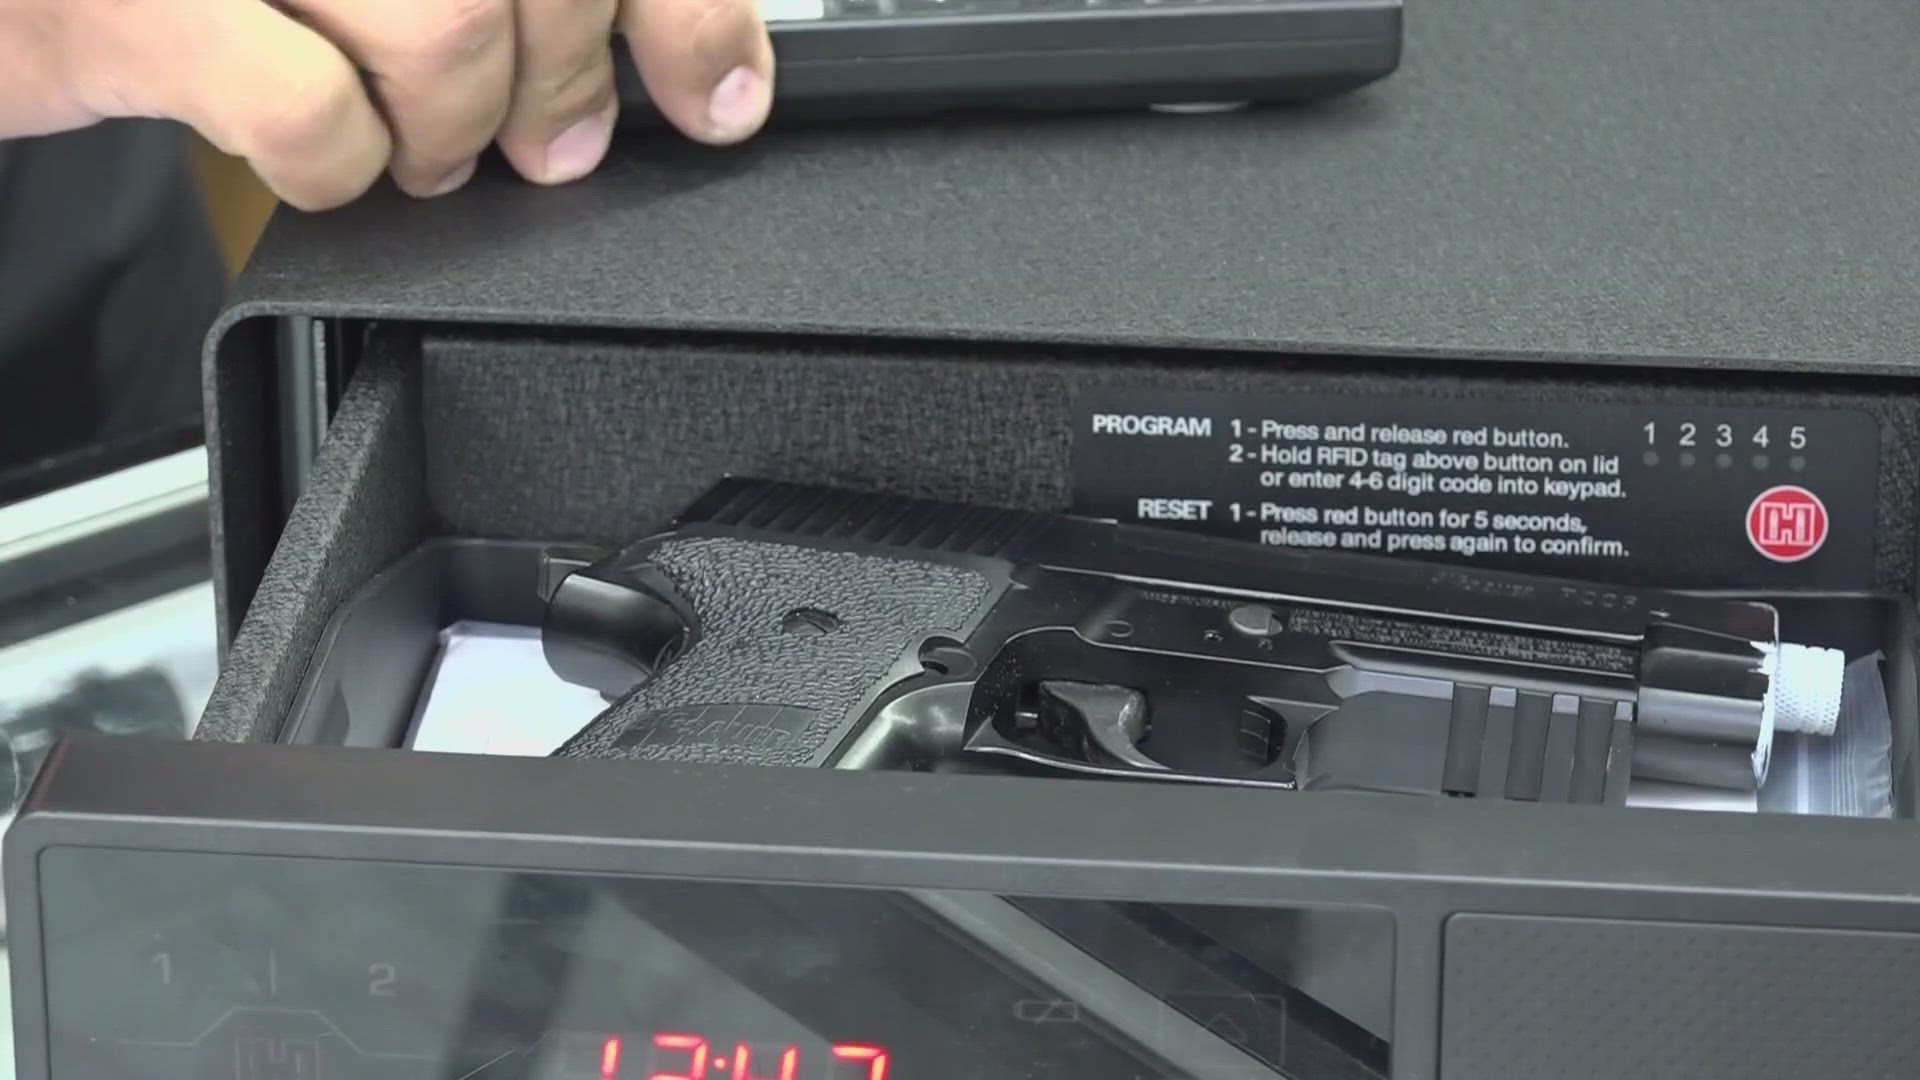 Experts say many accidental shootings can be prevented with safe storage and education.